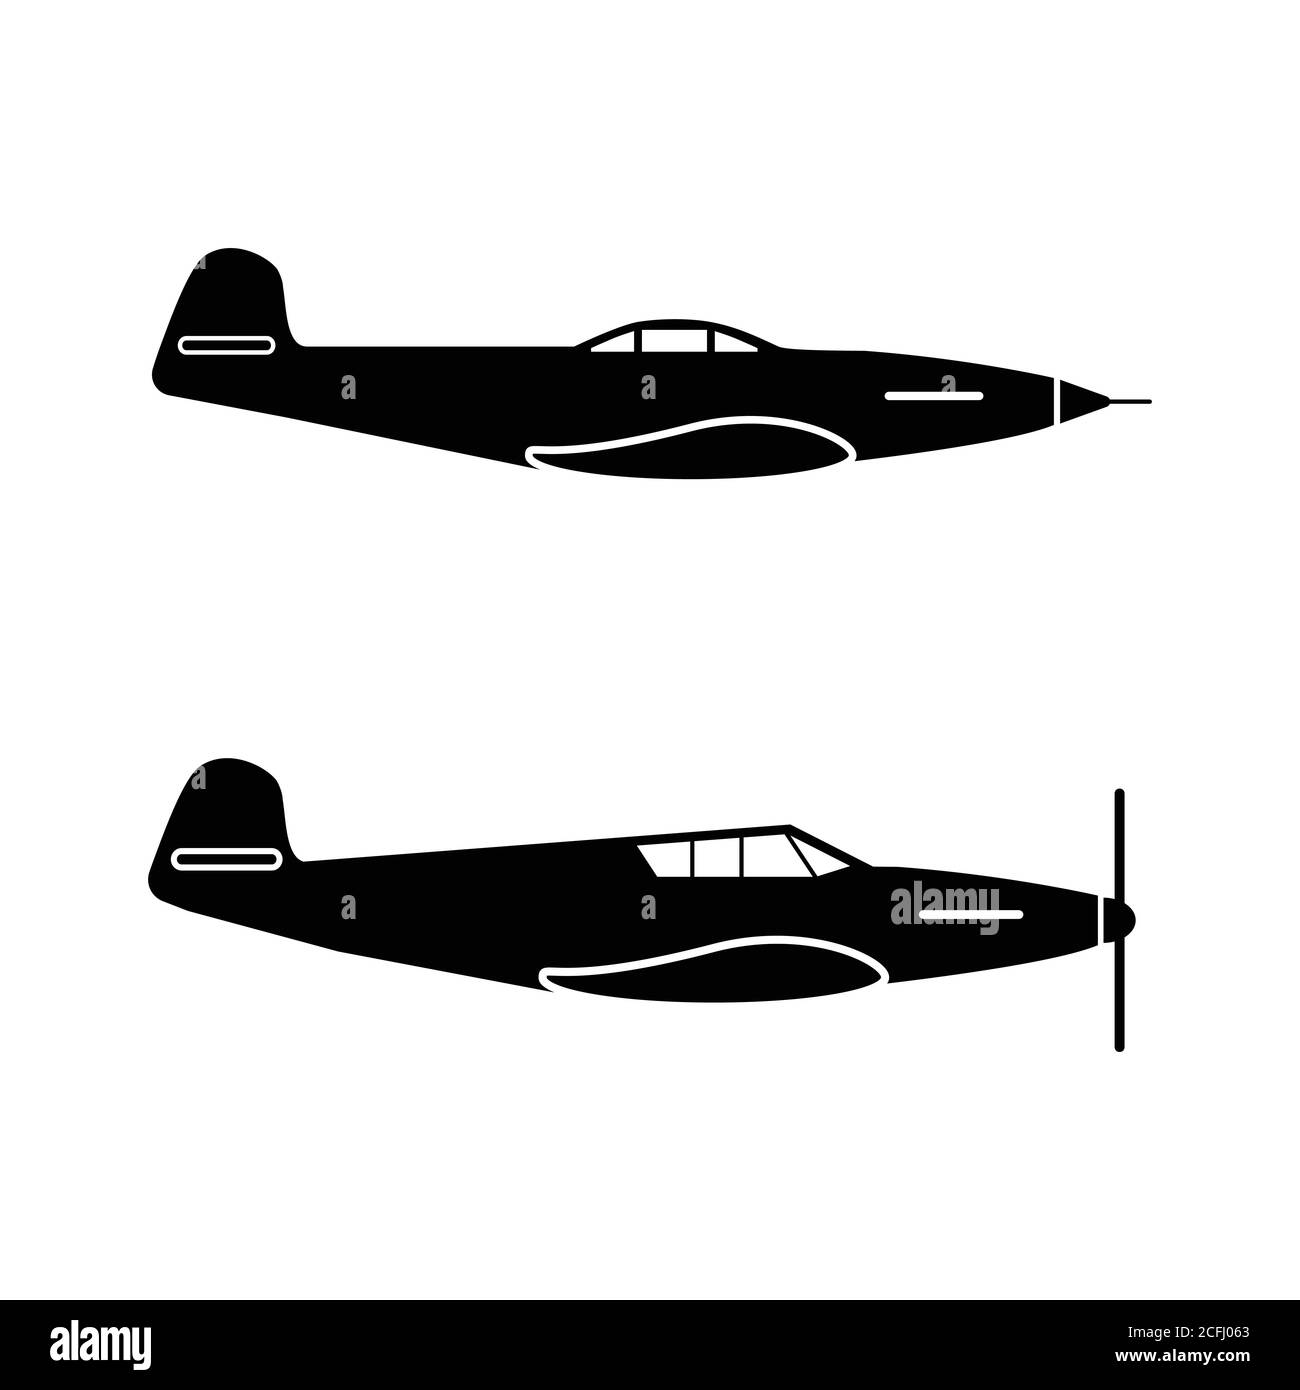 Military Aircraft Planes. Pictogram depicting new and old aircraft machines used in aerial warfare. Jet Powered vs Propeller Fighter Planes. EPS Vecto Stock Vector